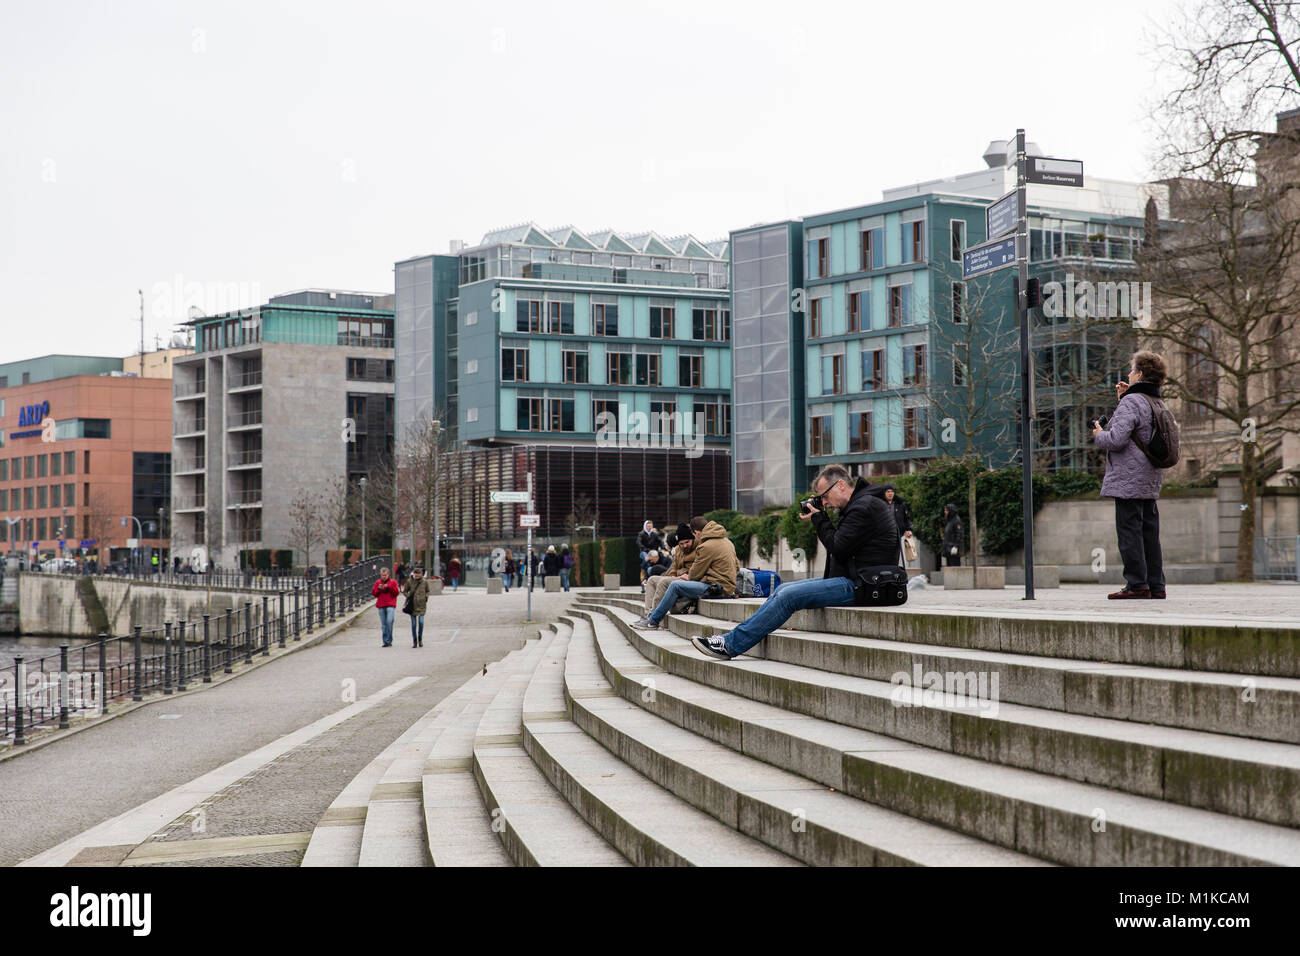 Man sitting on the steps in front of the river Spree in Berlin taking photographs of the modern architecture of the government district in Berlin Stock Photo